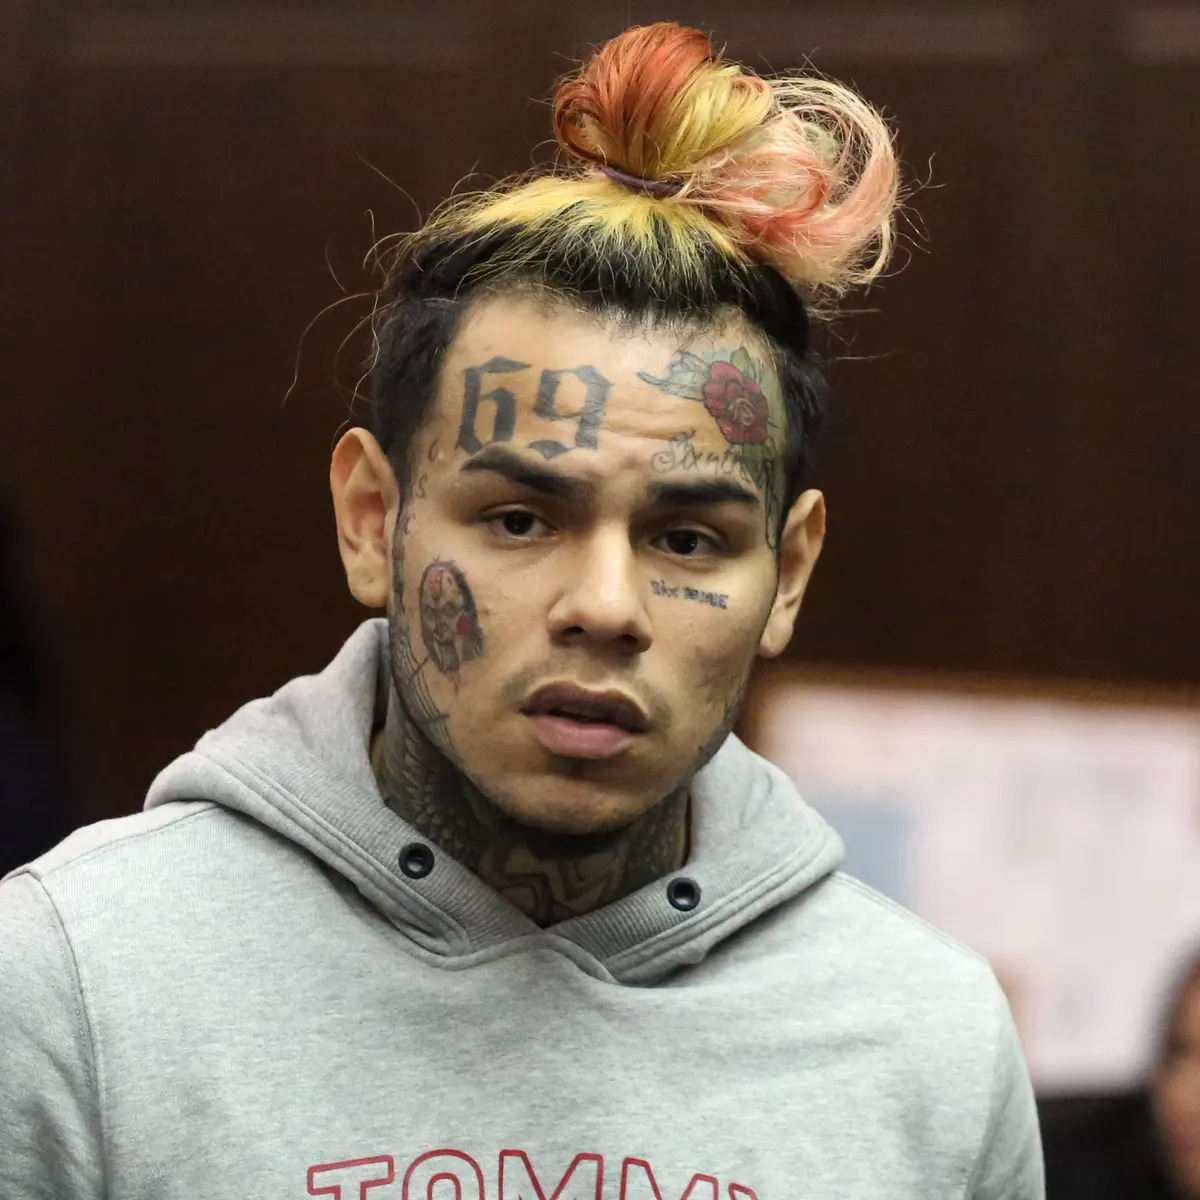 6ix9ine Dances With Danger By Flexing $1 Million Cash And Dropping Location